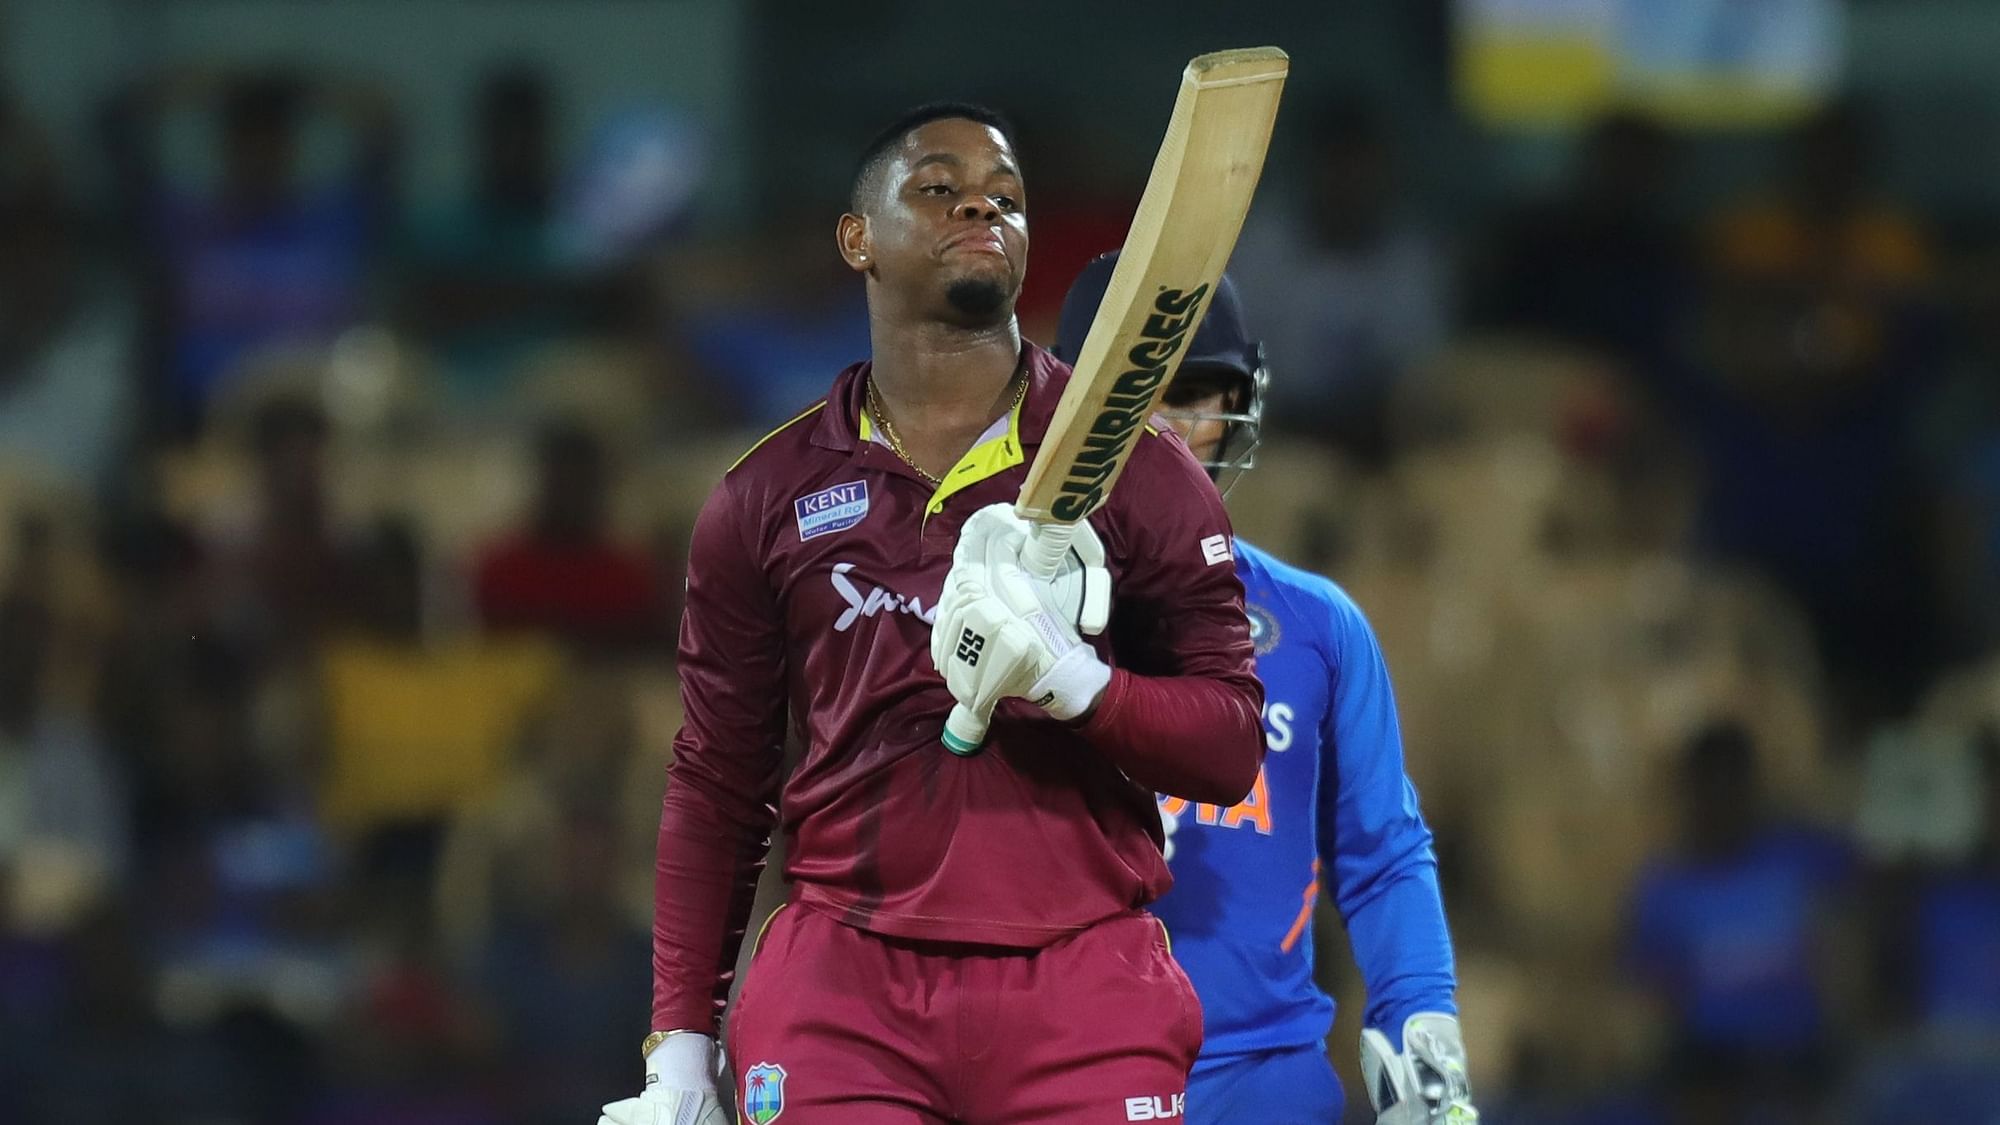 Shimron Hetmyer scored a 106-ball 139 to bring up his second ODI century against India.